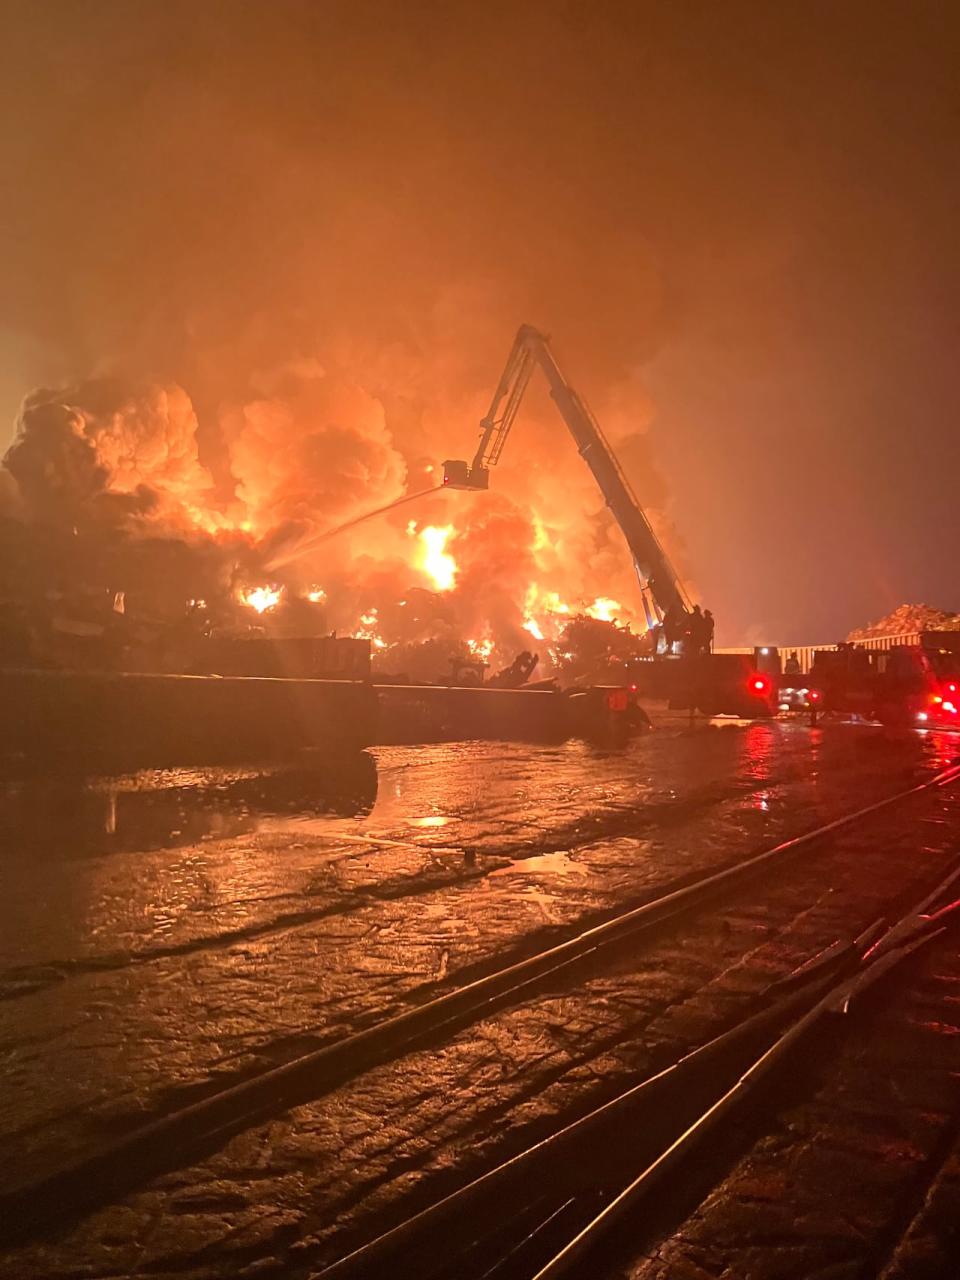 Piles of scrap metal caught fire at around 1 a.m. Thursday. As of 8 a.m., crews were still trying to knock the fires down. (Submitted by Ed Moyer - image credit)